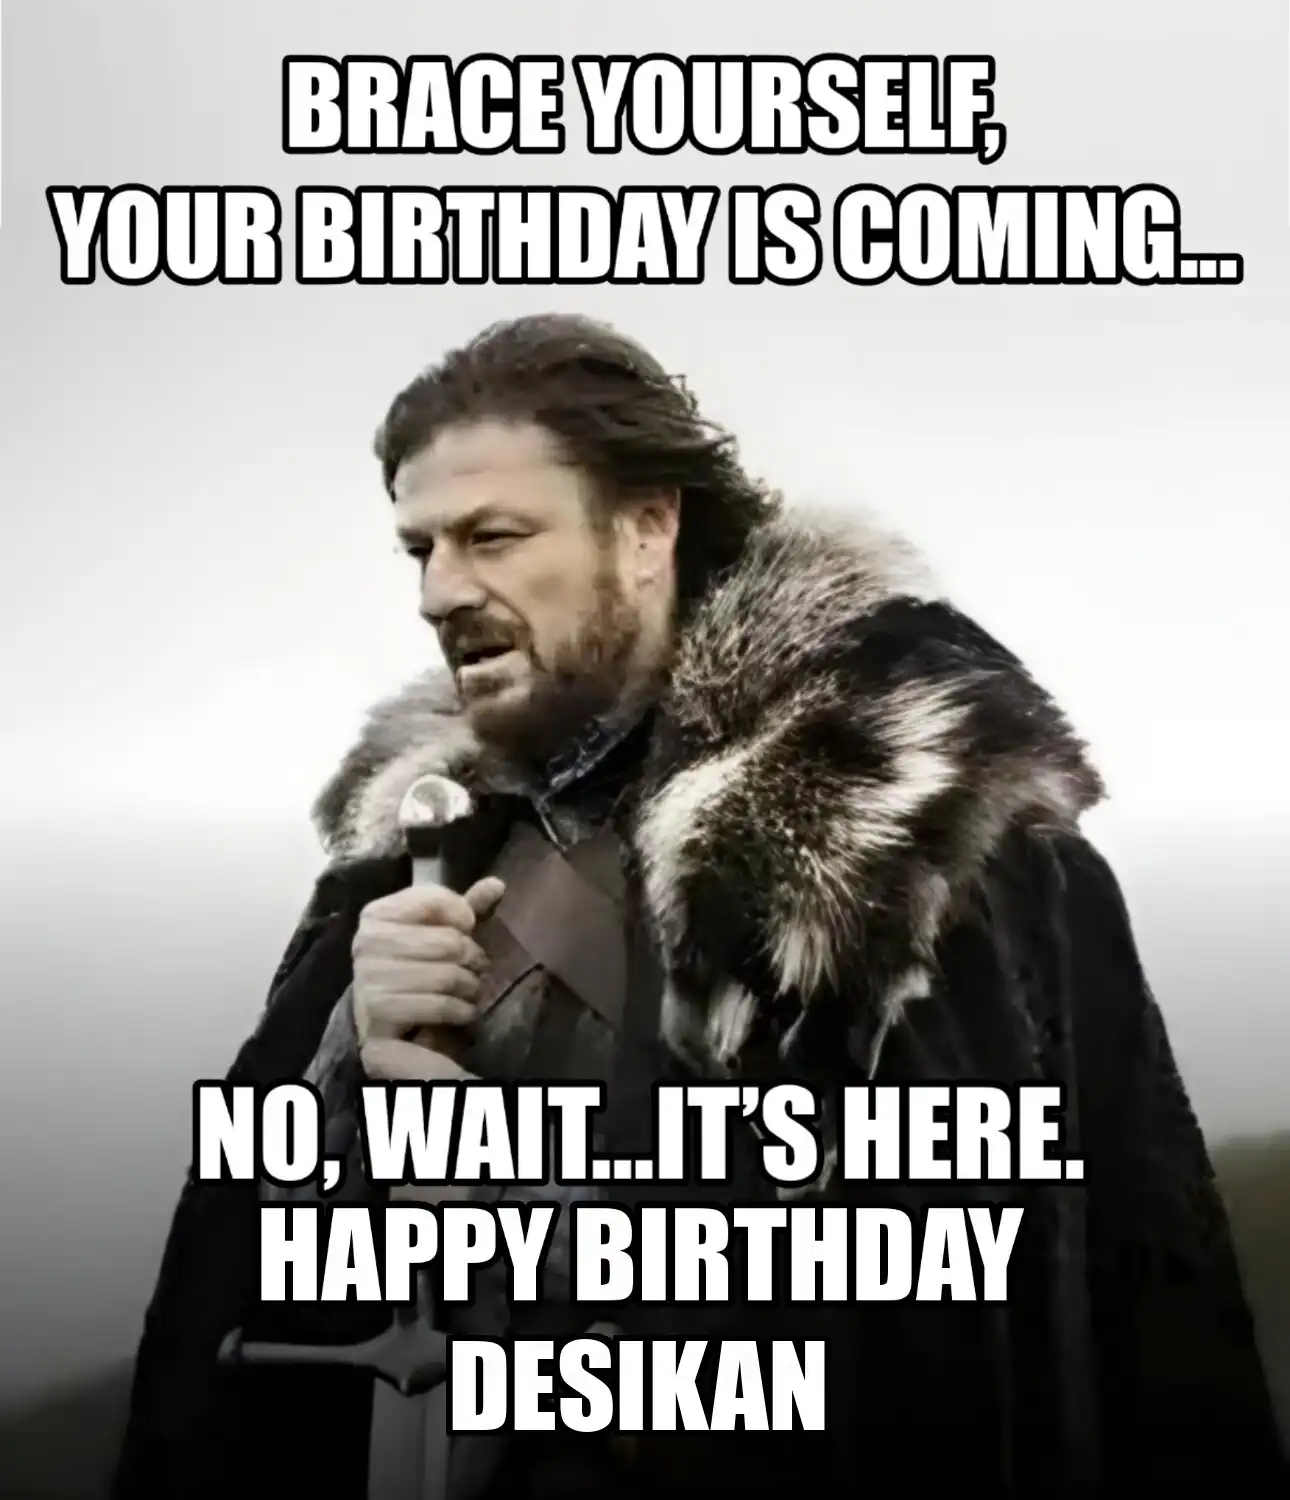 Happy Birthday Desikan Brace Yourself Your Birthday Is Coming Meme